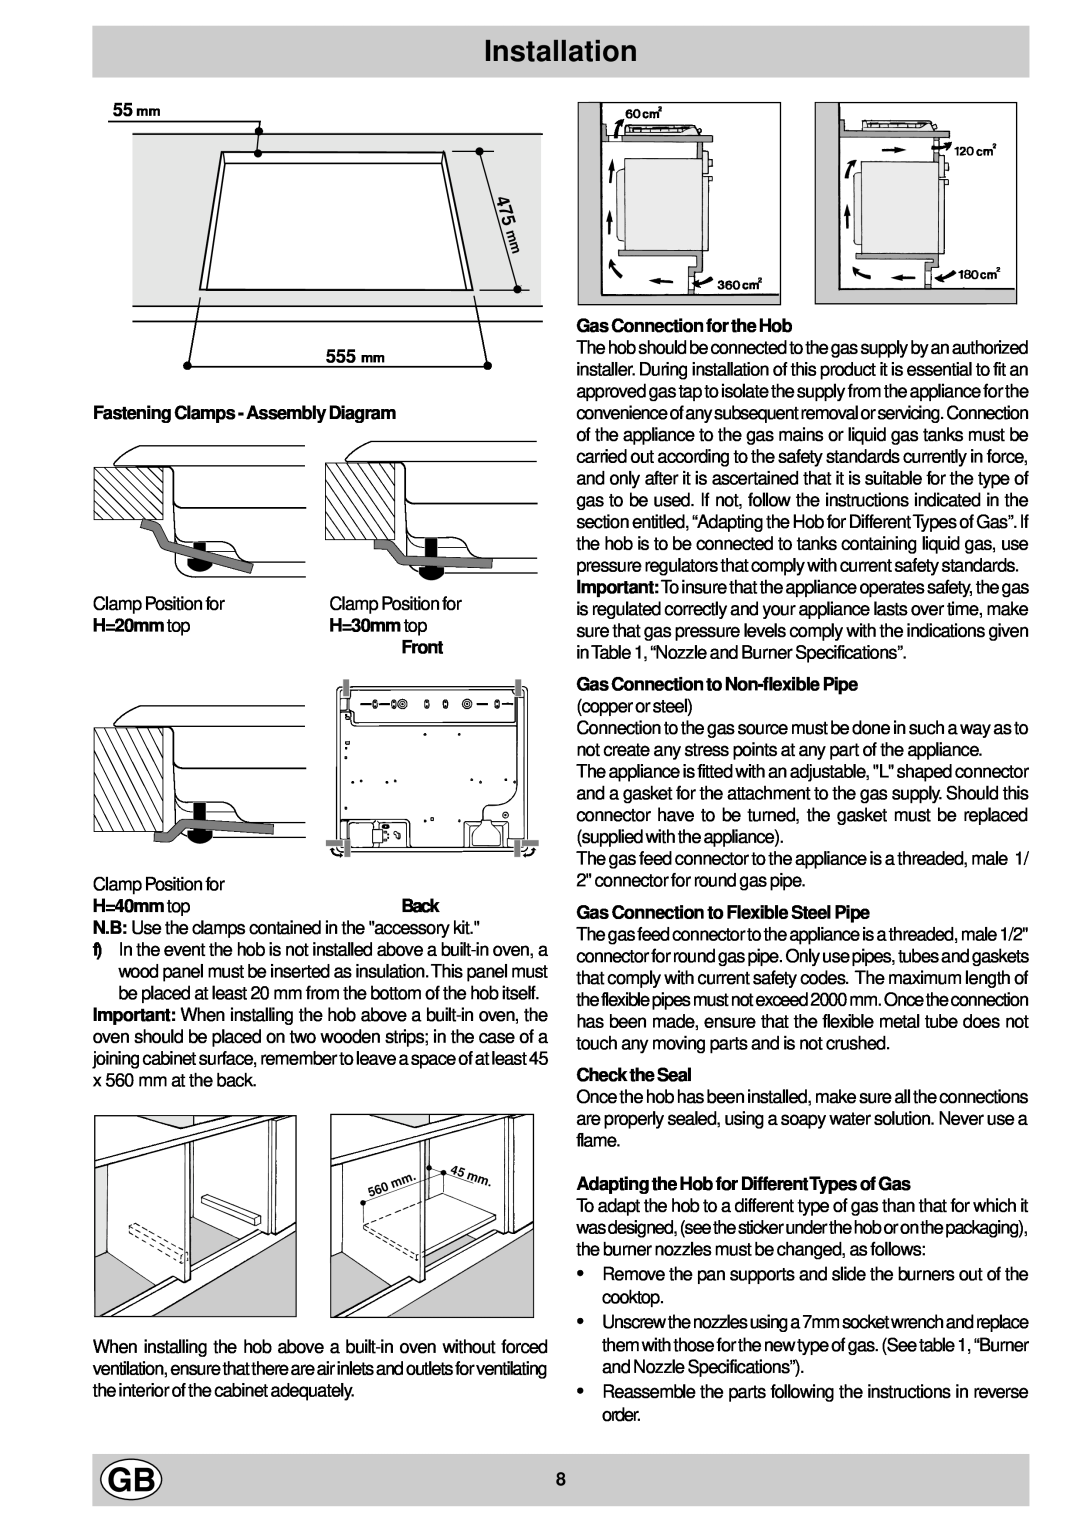 Hotpoint G740 manual Installation, mm Fastening Clamps - Assembly Diagram, H=20mm top, H=30mm top, Front, Check the Seal 